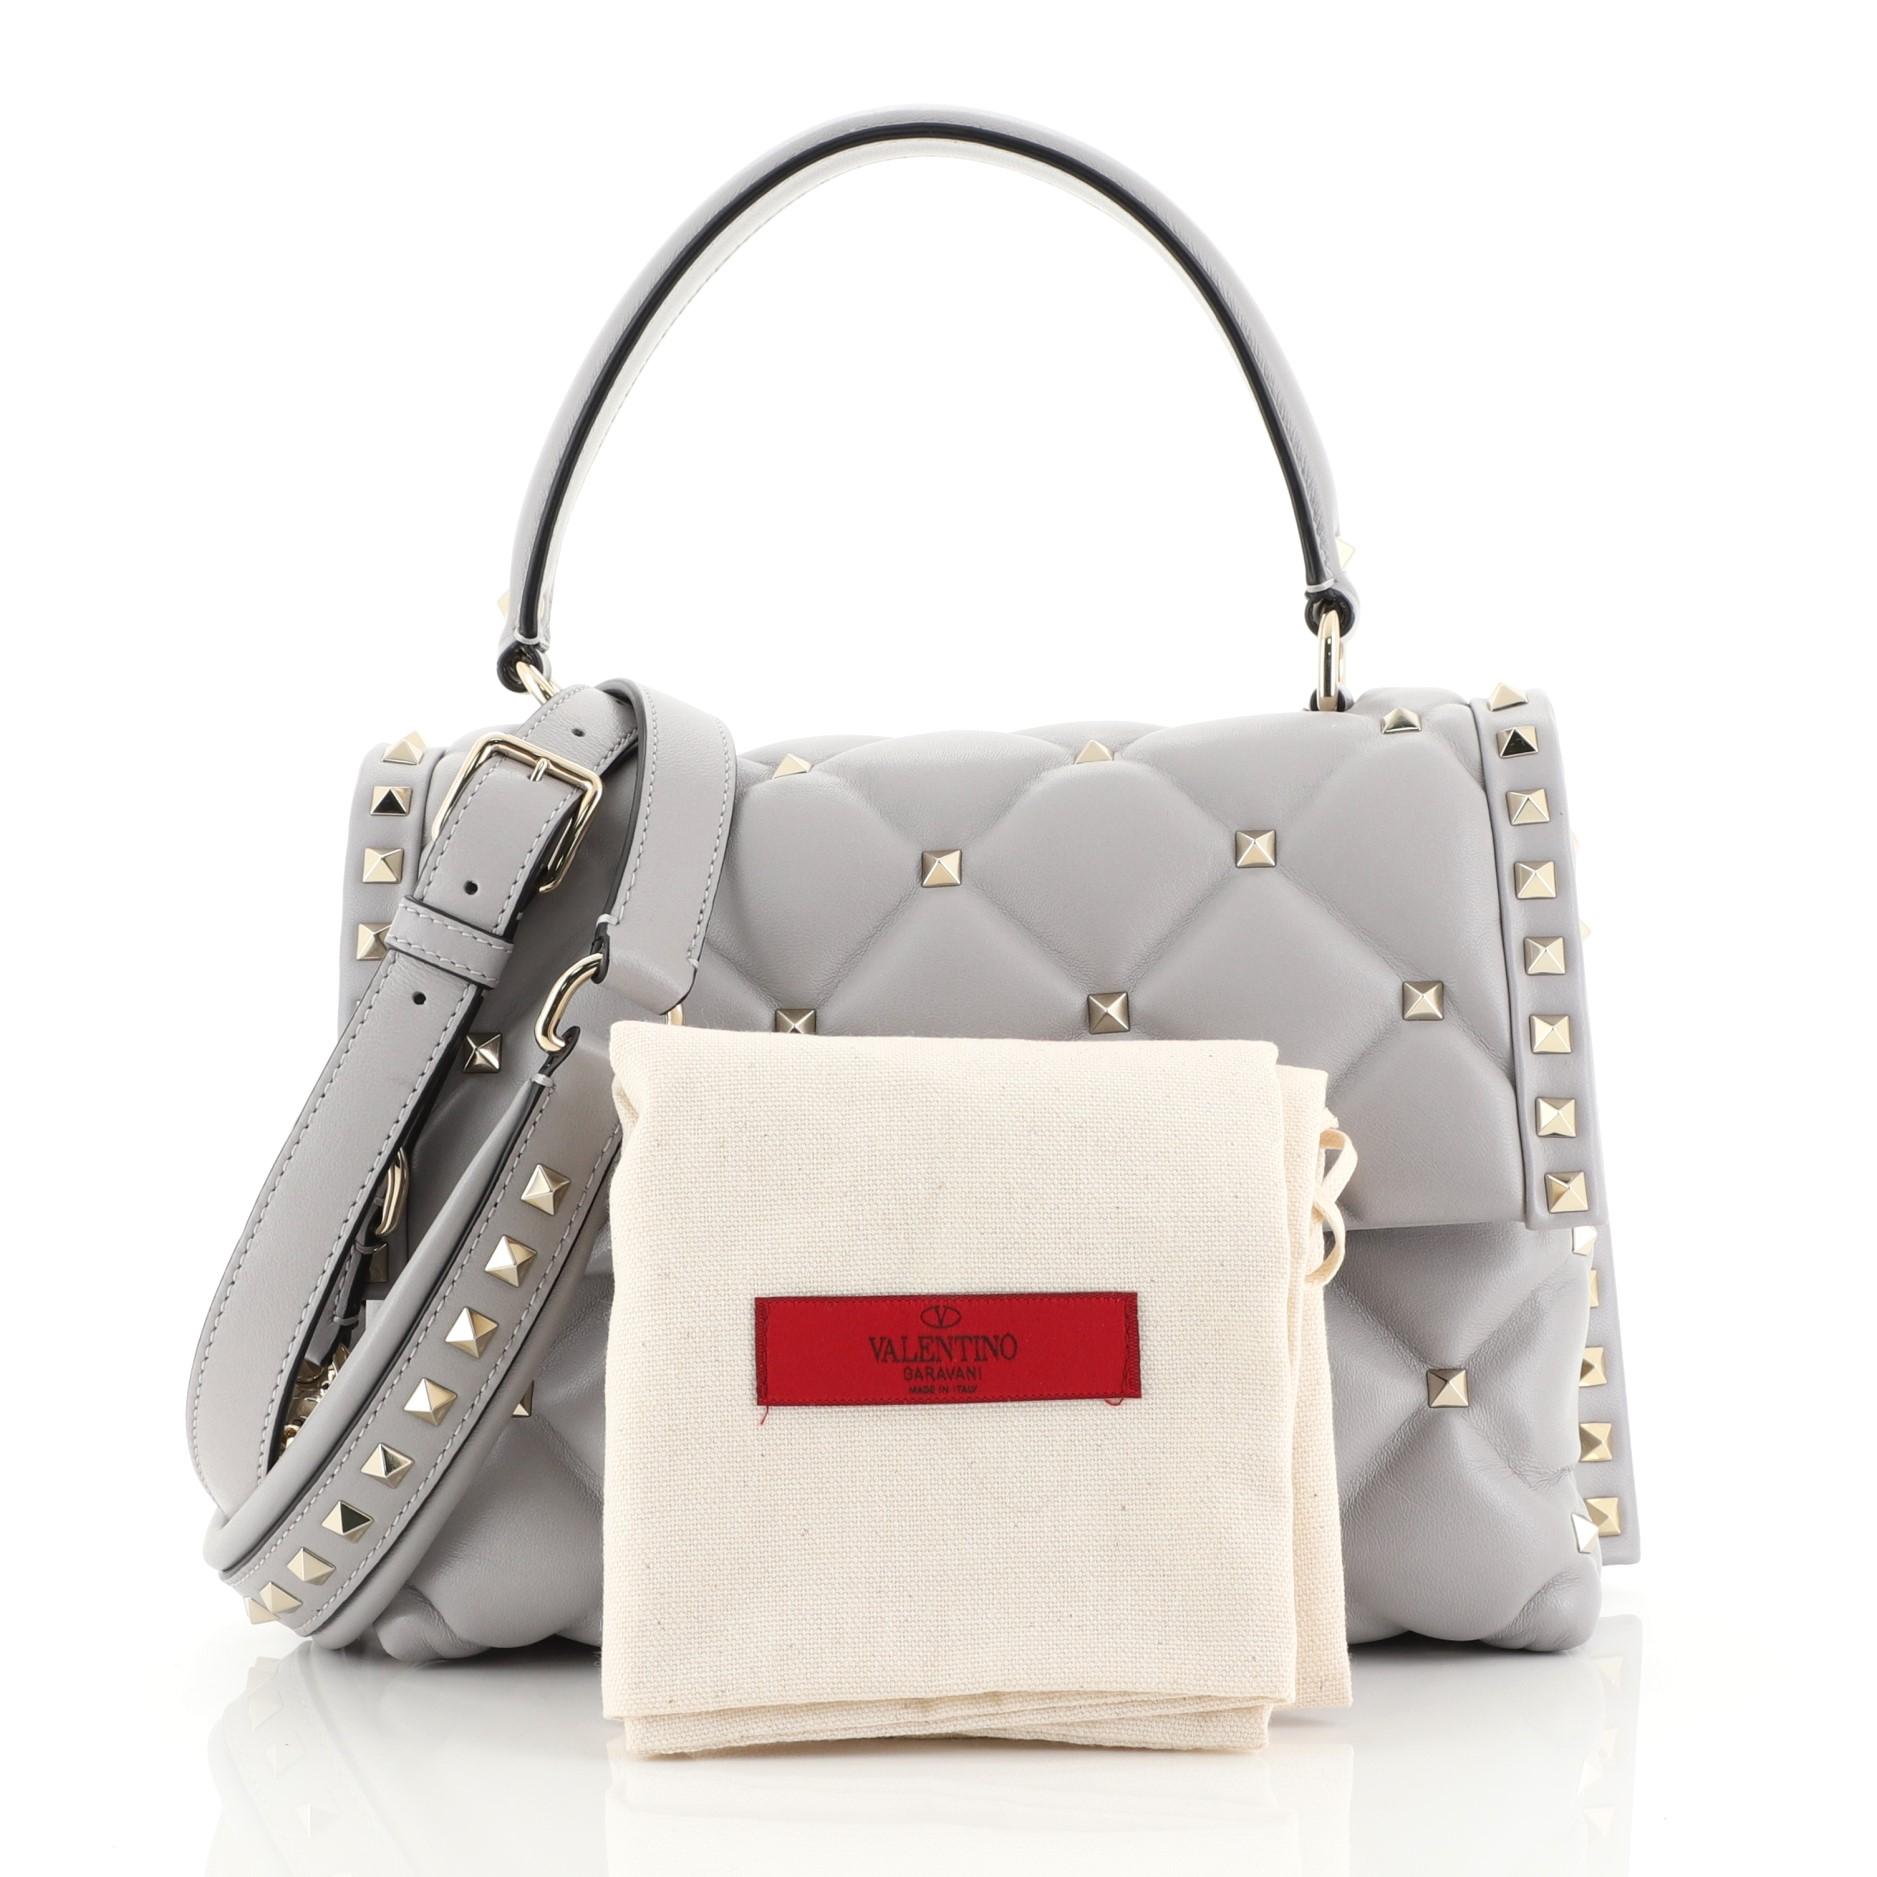 This Valentino Candystud Top Handle Bag Leather Medium, crafted in gray leather, features a leather top handle, rockstud embellishments, and gold-tone hardware. Its twist-lock closure opens to a neutral fabric interior with zip and slip pockets.